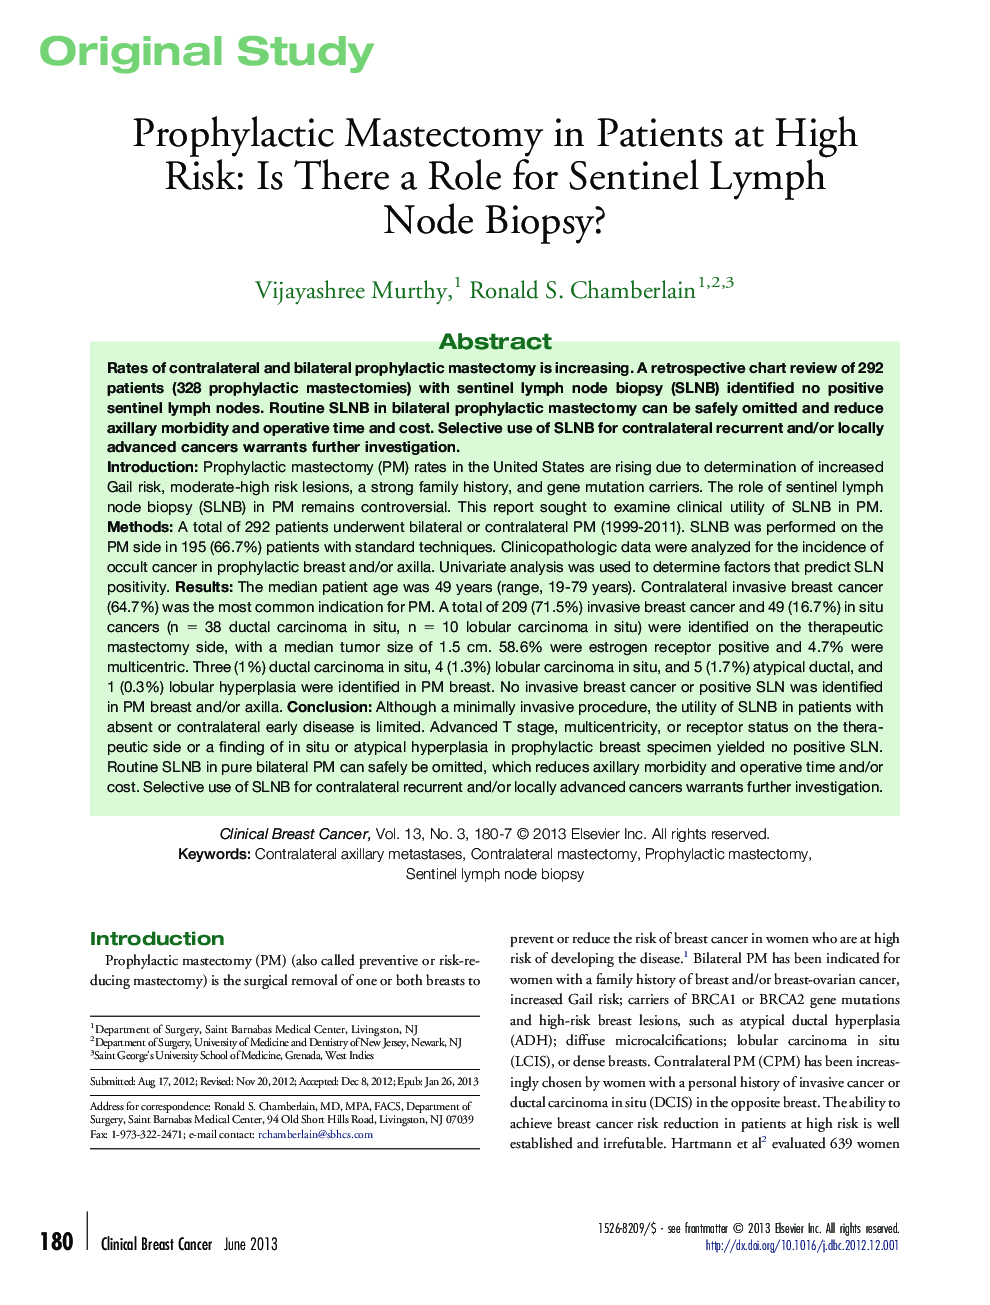 Prophylactic Mastectomy in Patients at High Risk: Is There a Role for Sentinel Lymph Node Biopsy?